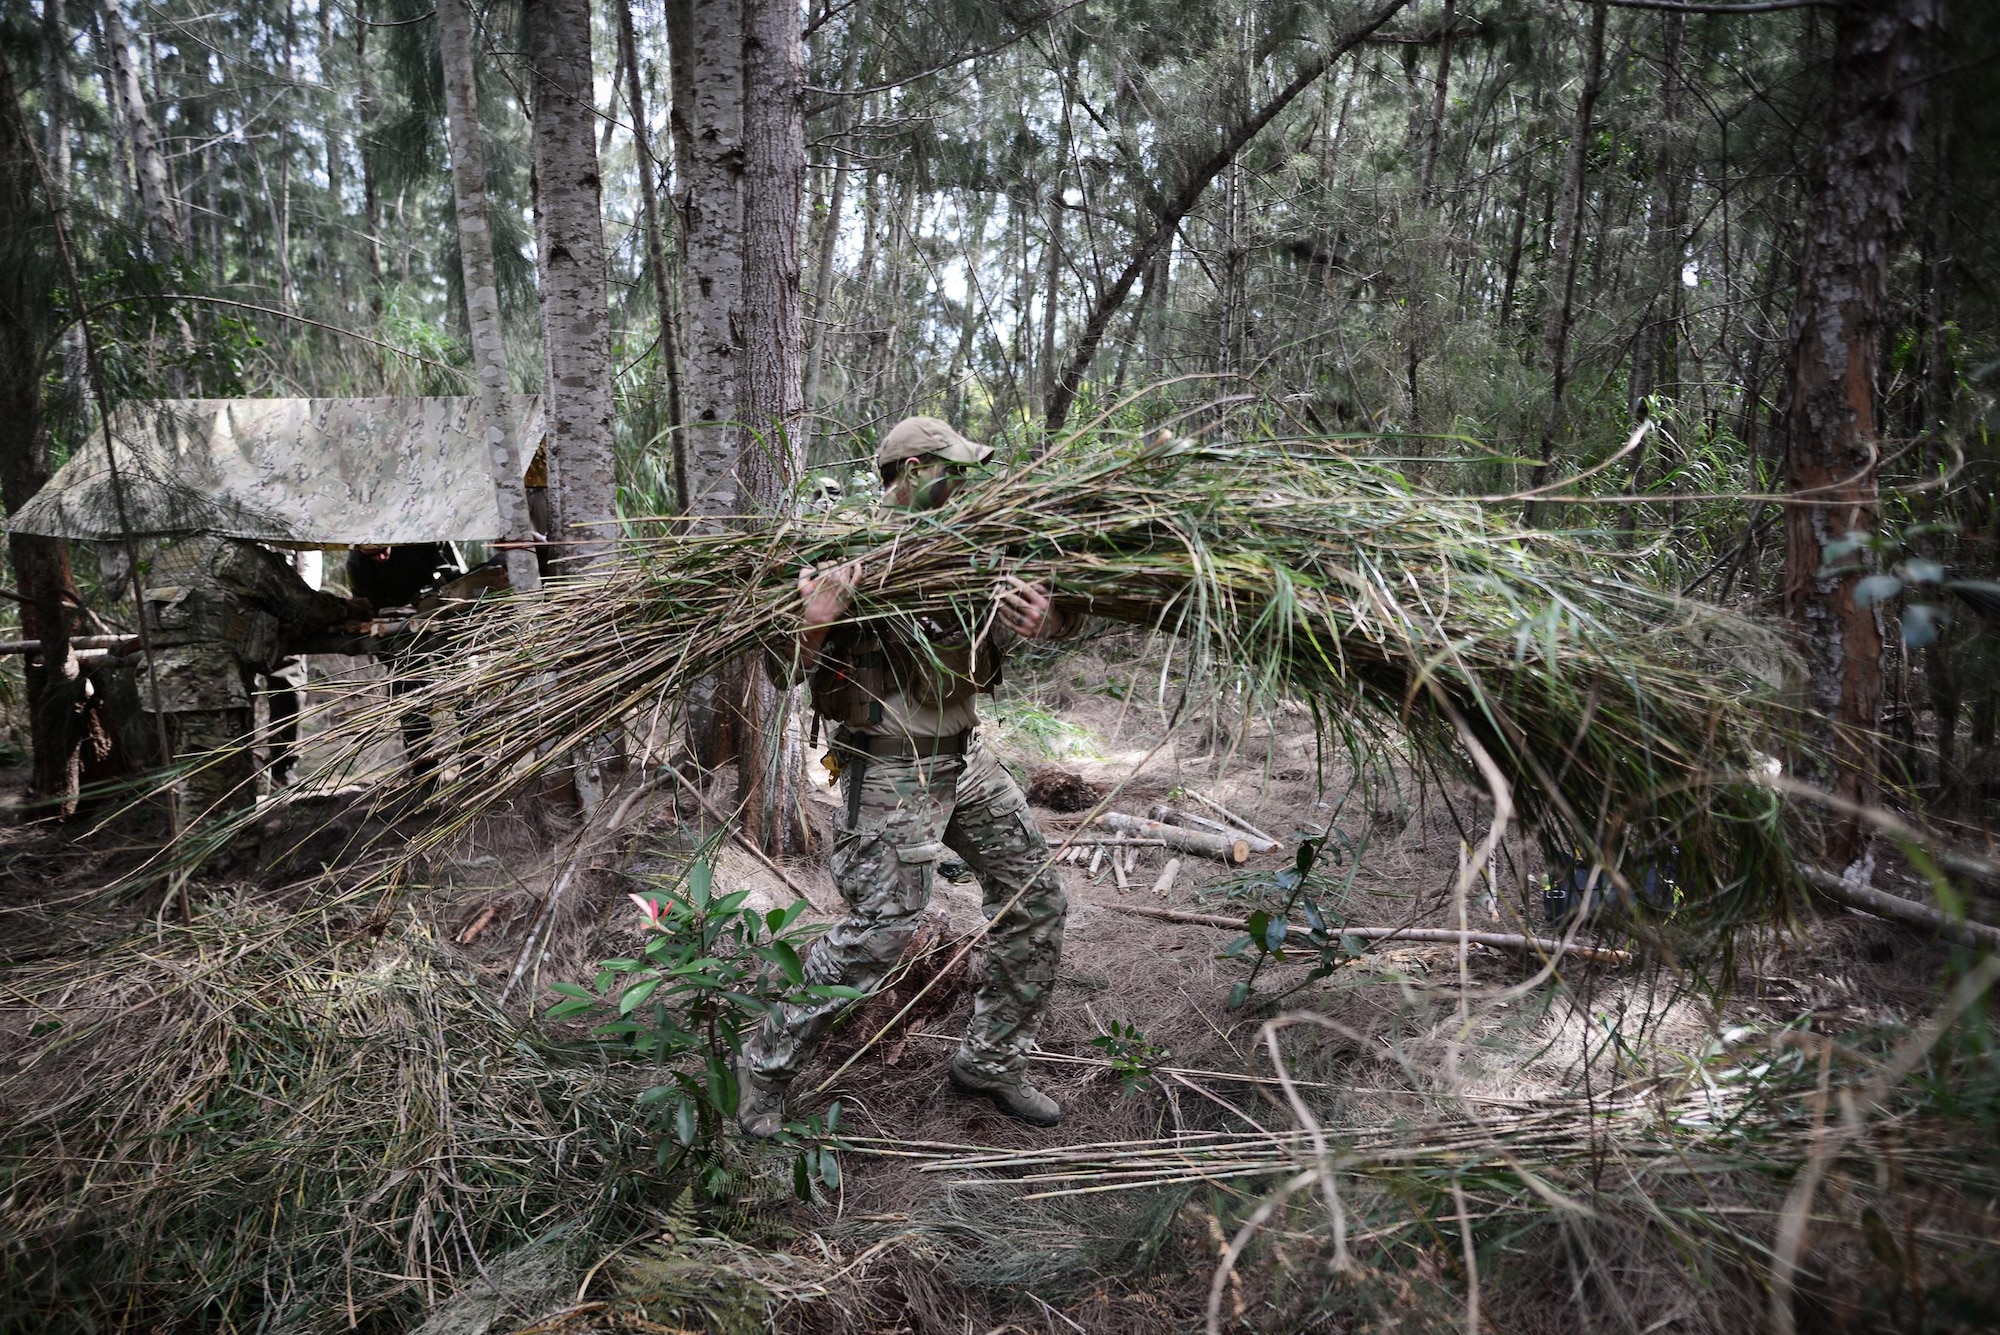 Senior Airman Ian Kuhn, a survival, evasion, resistance, and escape (SERE) instructor with the 103rd Rescue Squadron, demonstrates how to build a concealed shelter during a combat and water survival training course at Homestead Air Reserve Base, Fla., Jan. 20, 2016. During this training, aircrew members gained refresher training on using their emergency radios, tactical movements through difficult terrain, how to build shelters, ways to build fires and methods for evading the enemy. (U.S. Air National Guard/Staff Sgt. Christopher S. Muncy)